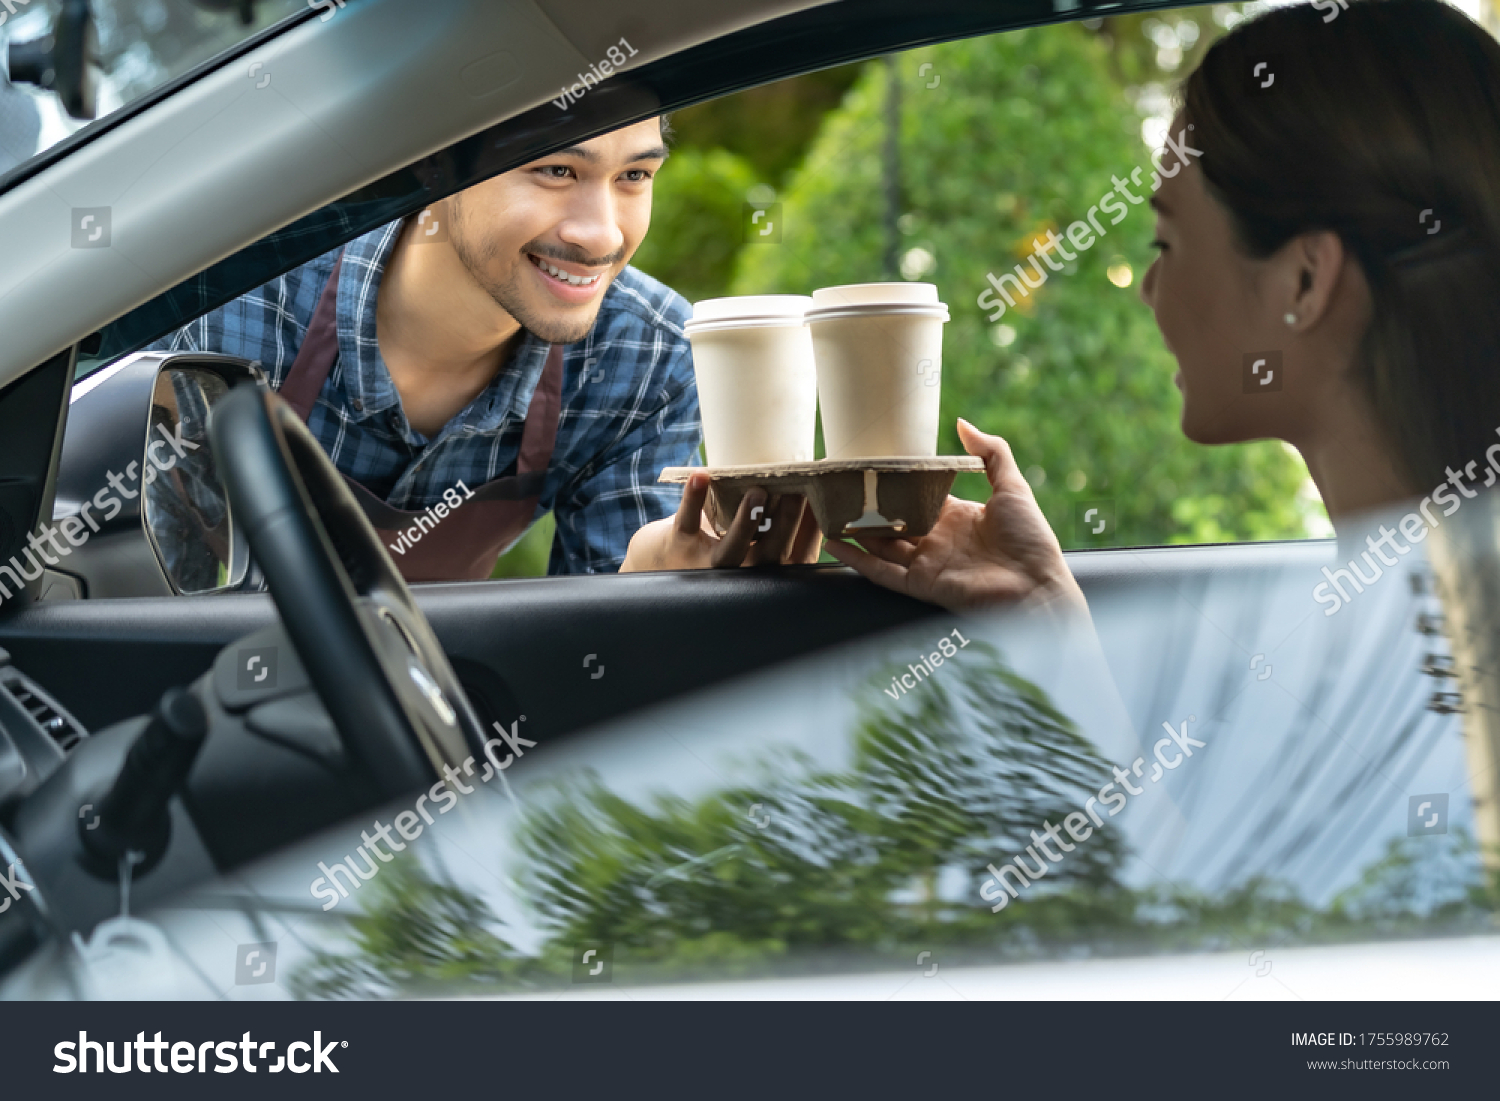 Waiter giving hot coffee cup with disposable tray and bakery bag through car window to customer at drive thru service station. Drive thru is popular service after coronavirus covid-19 pandemic. #1755989762